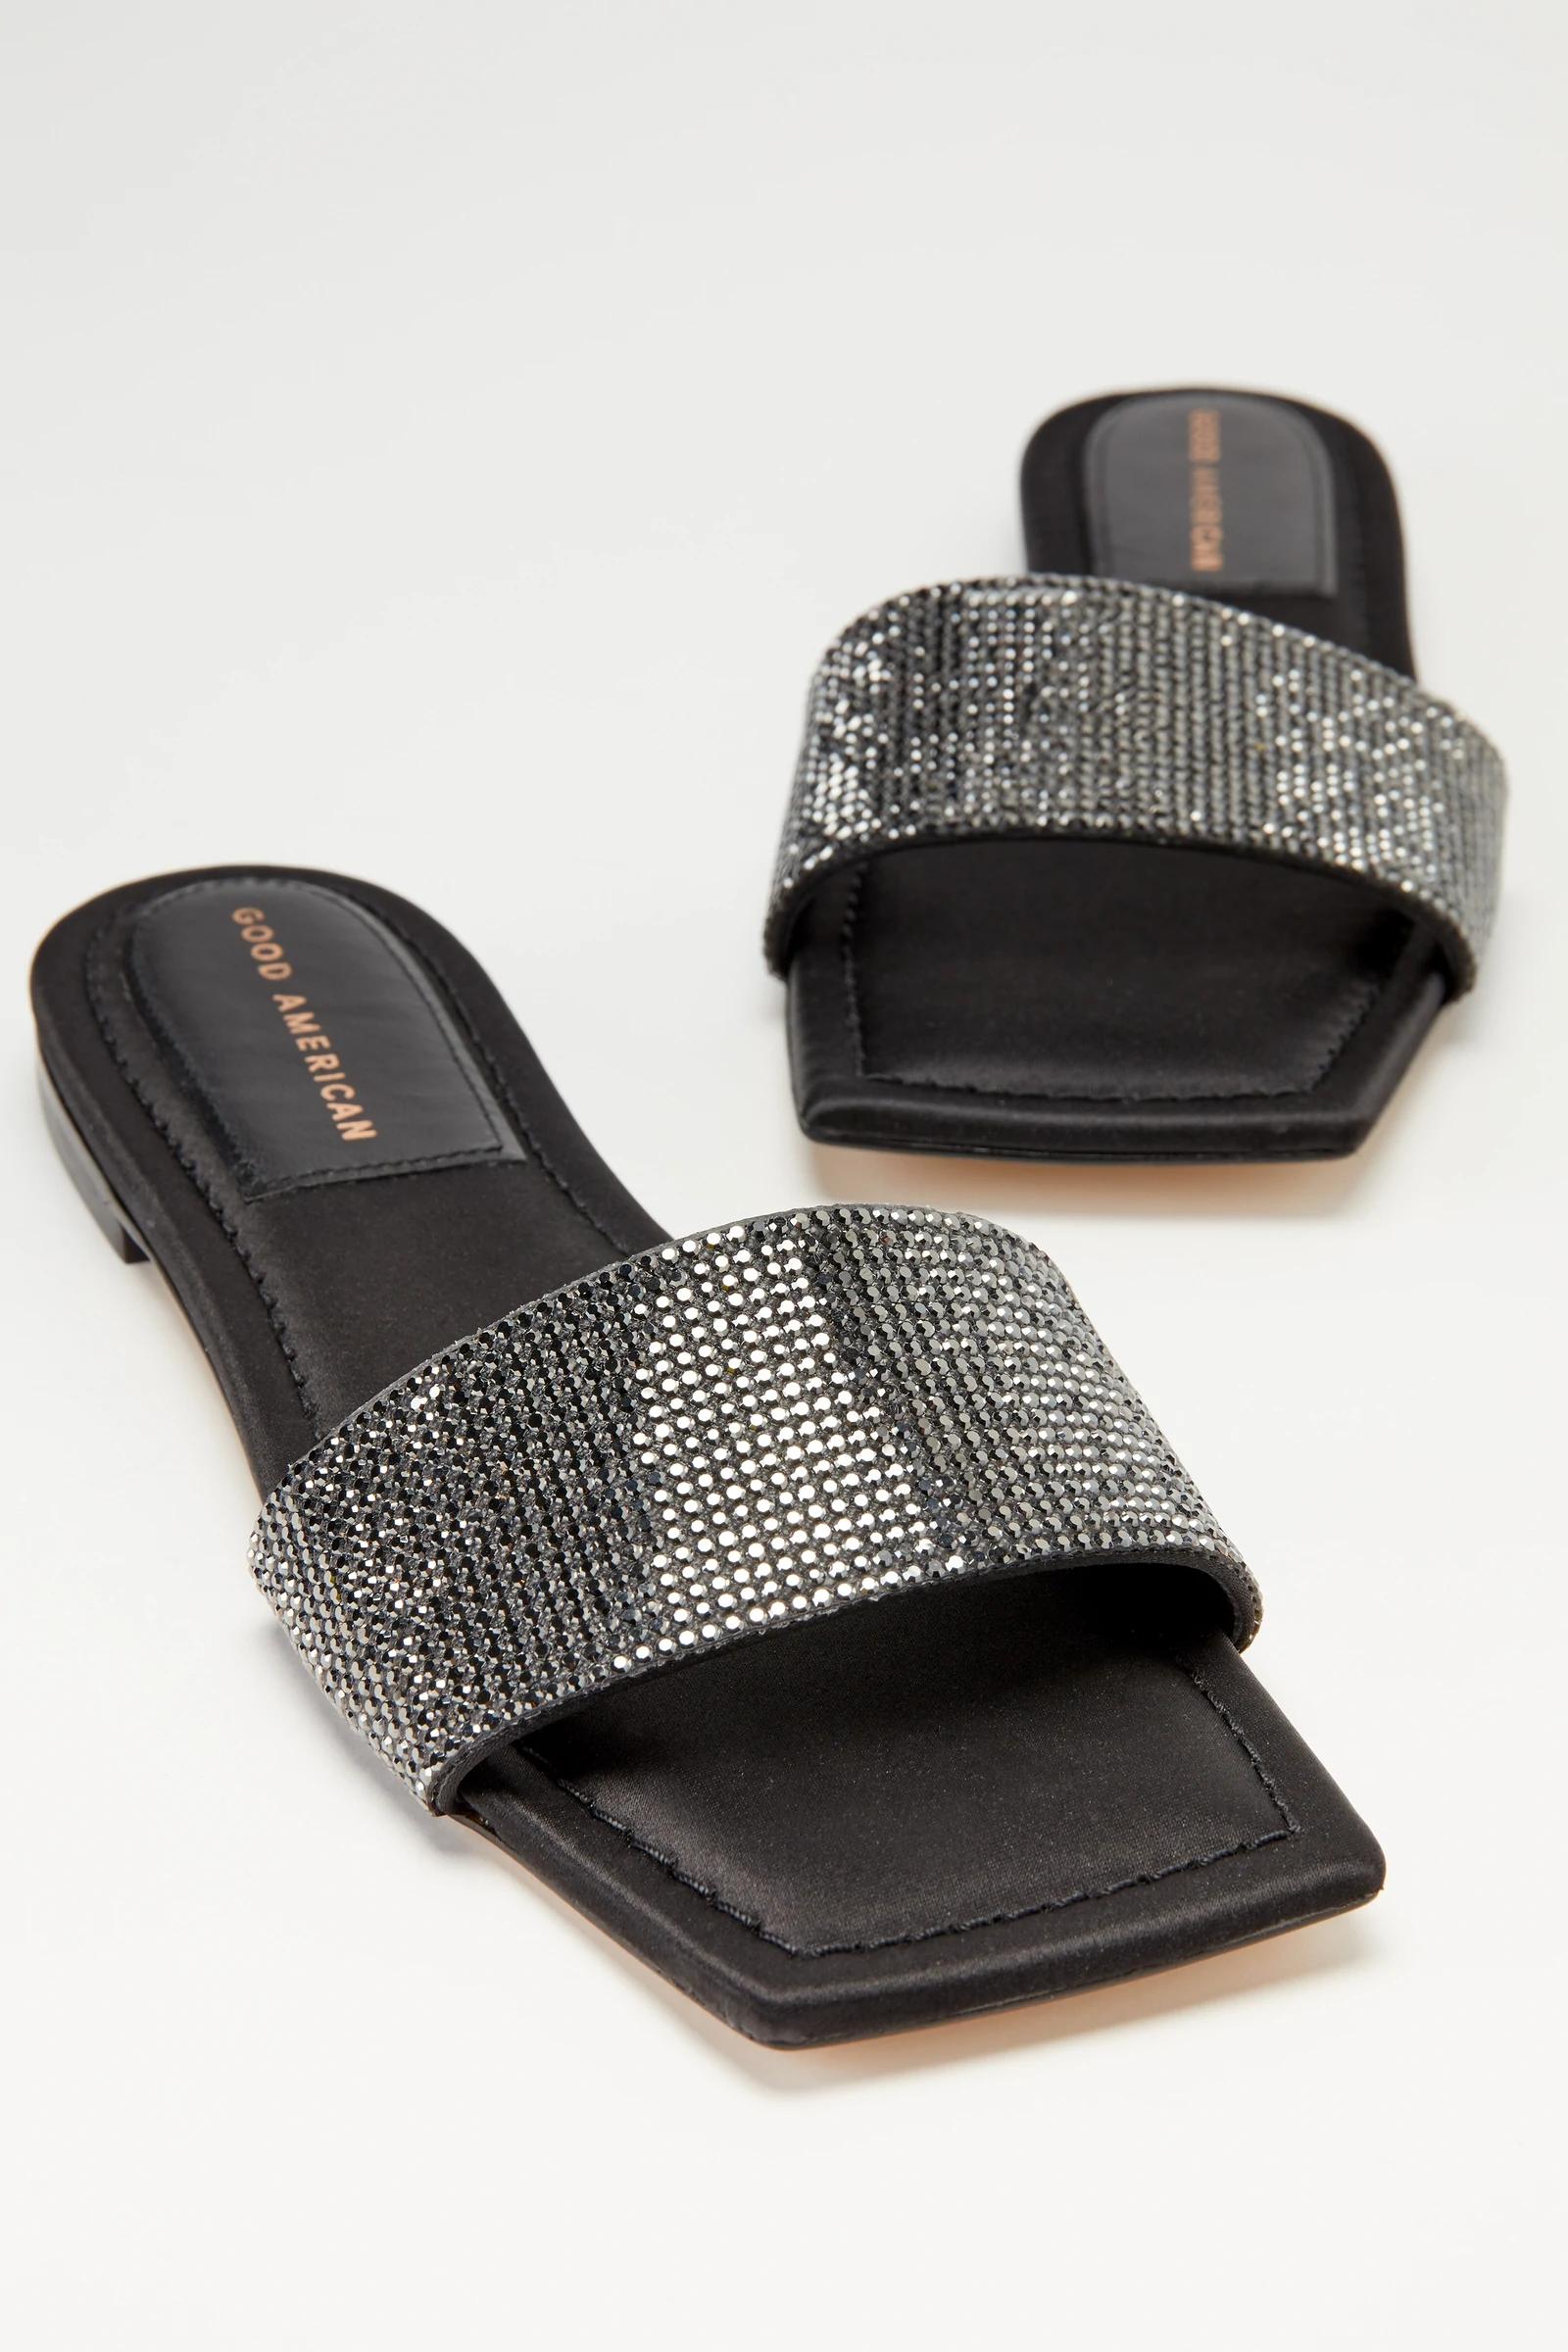 A pair of square toe sandals with crystals on the strap